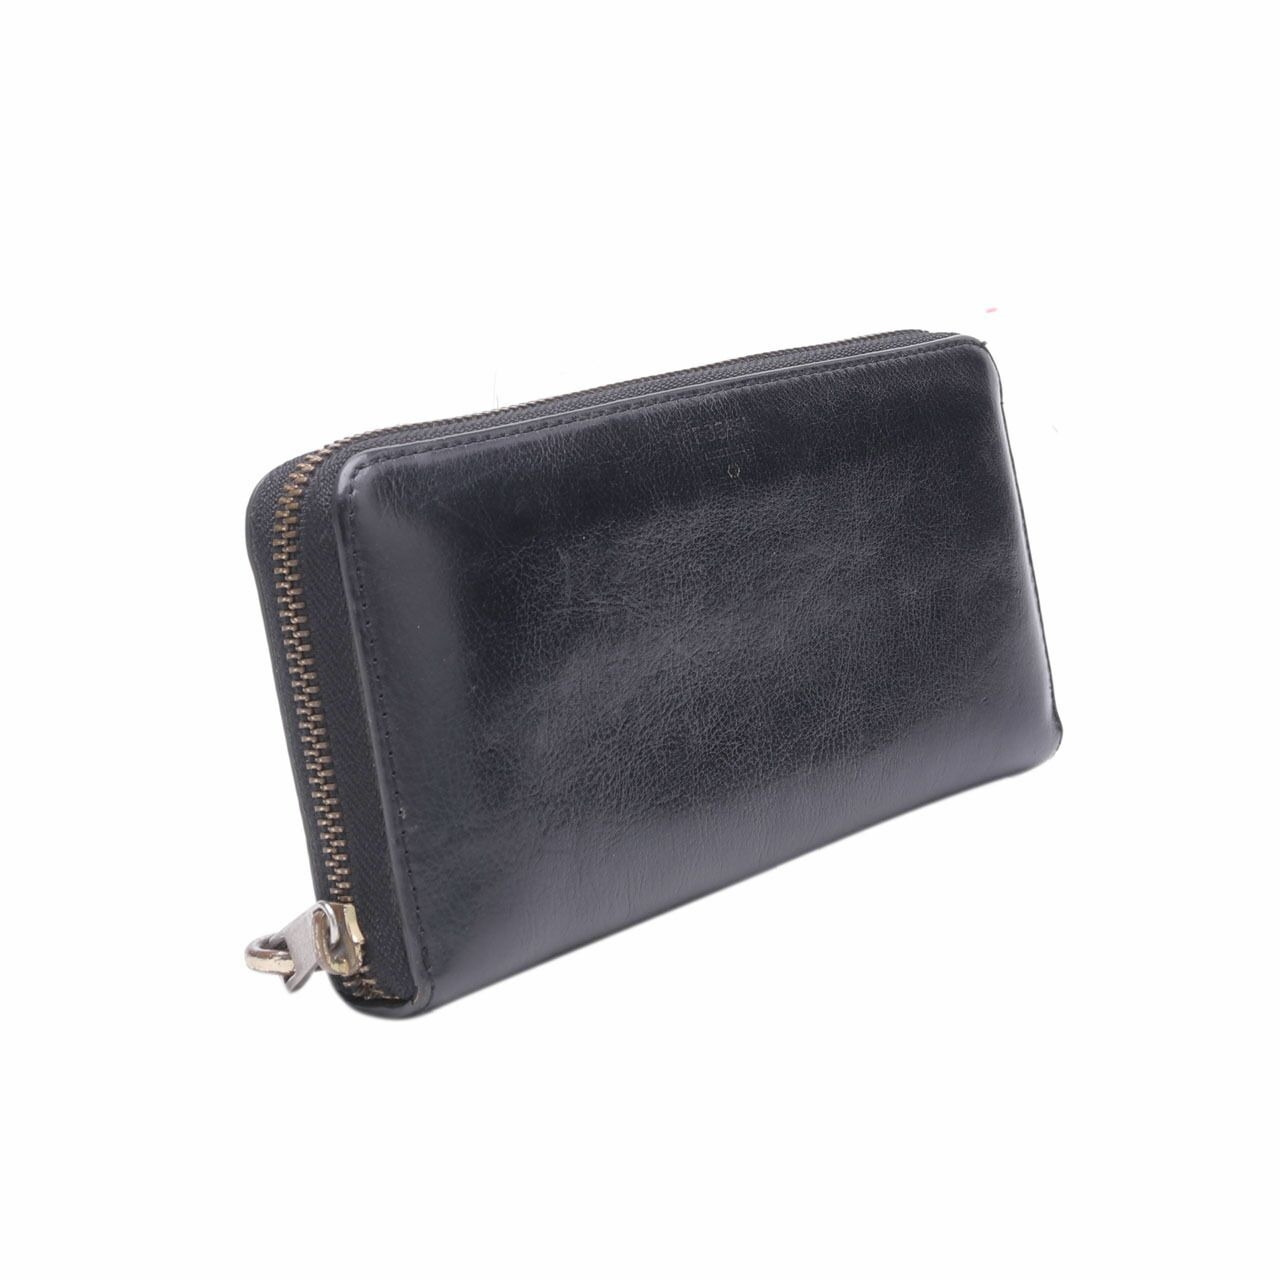 Fossil Sydney Leather Double Accordion Shell Black Wallet